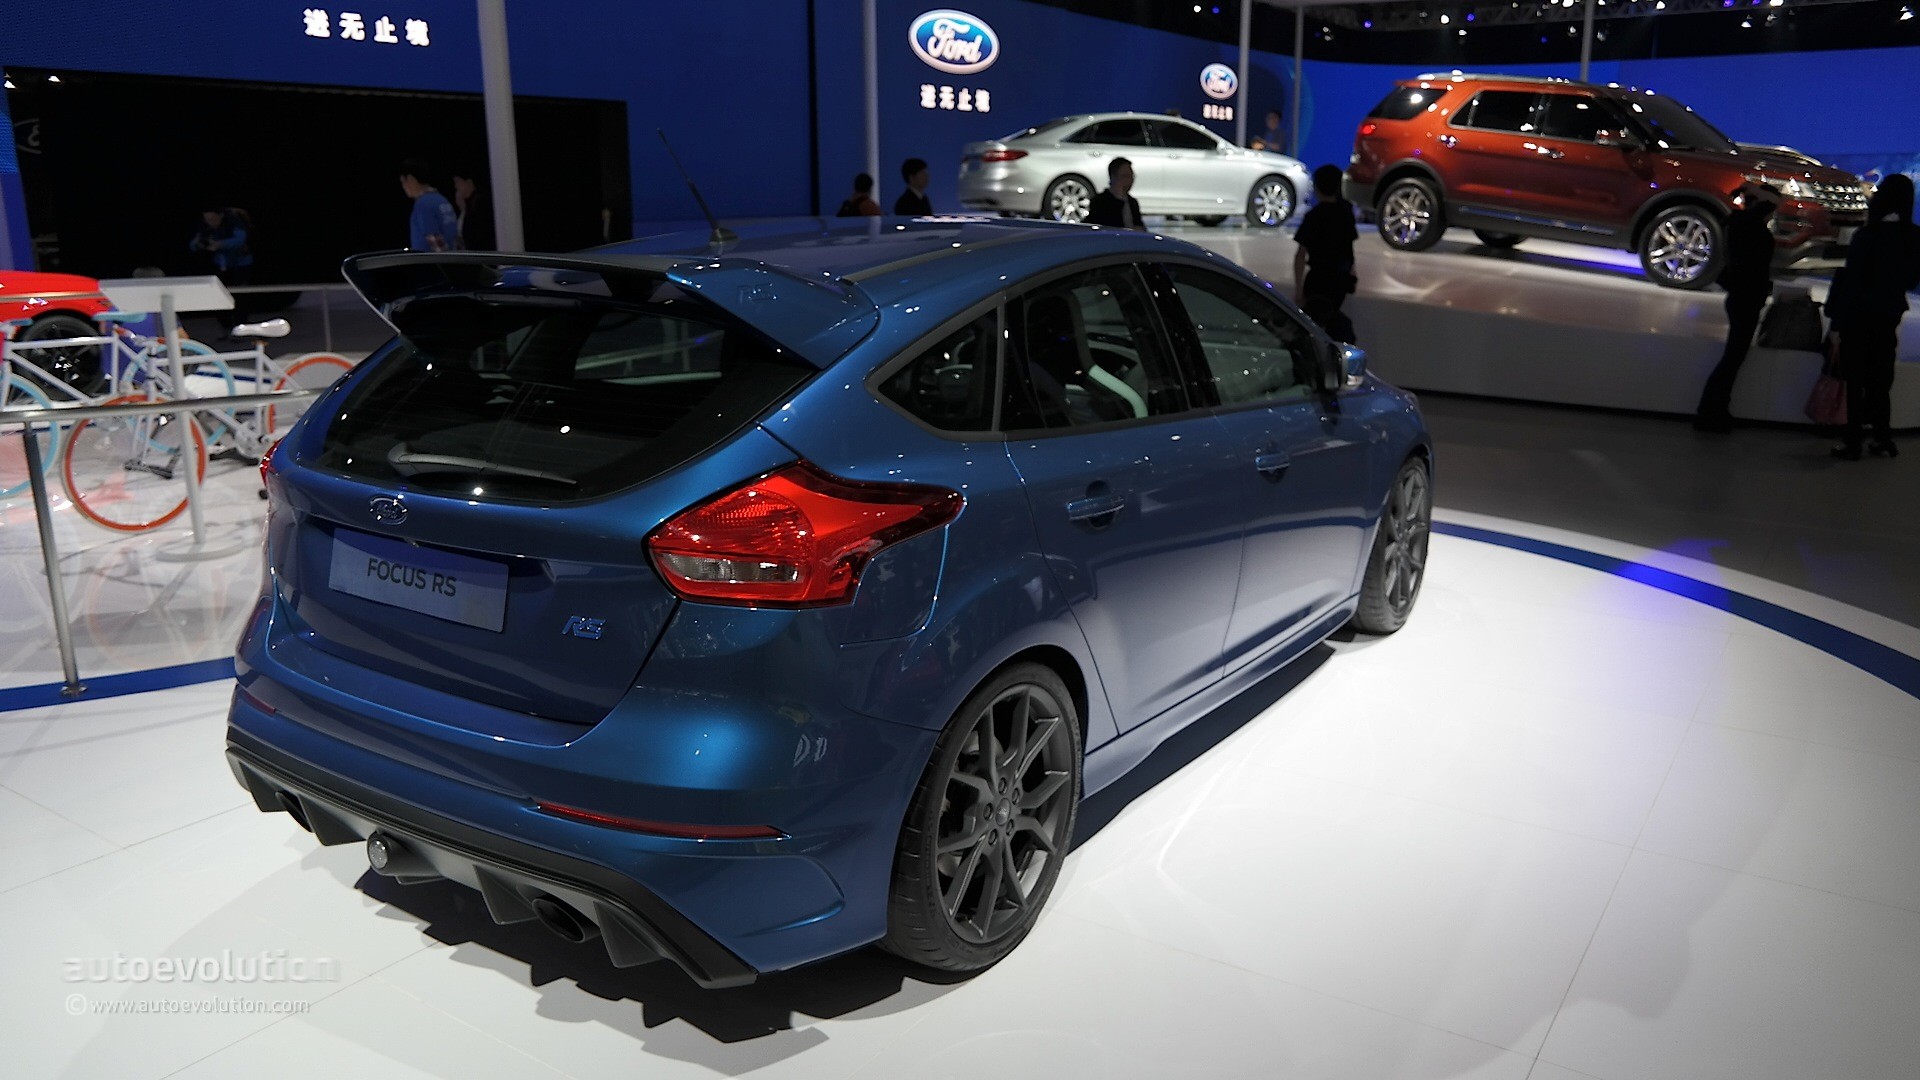 16 Ford Focus Rs Arriving In China Via The Shanghai Auto Show Autoevolution